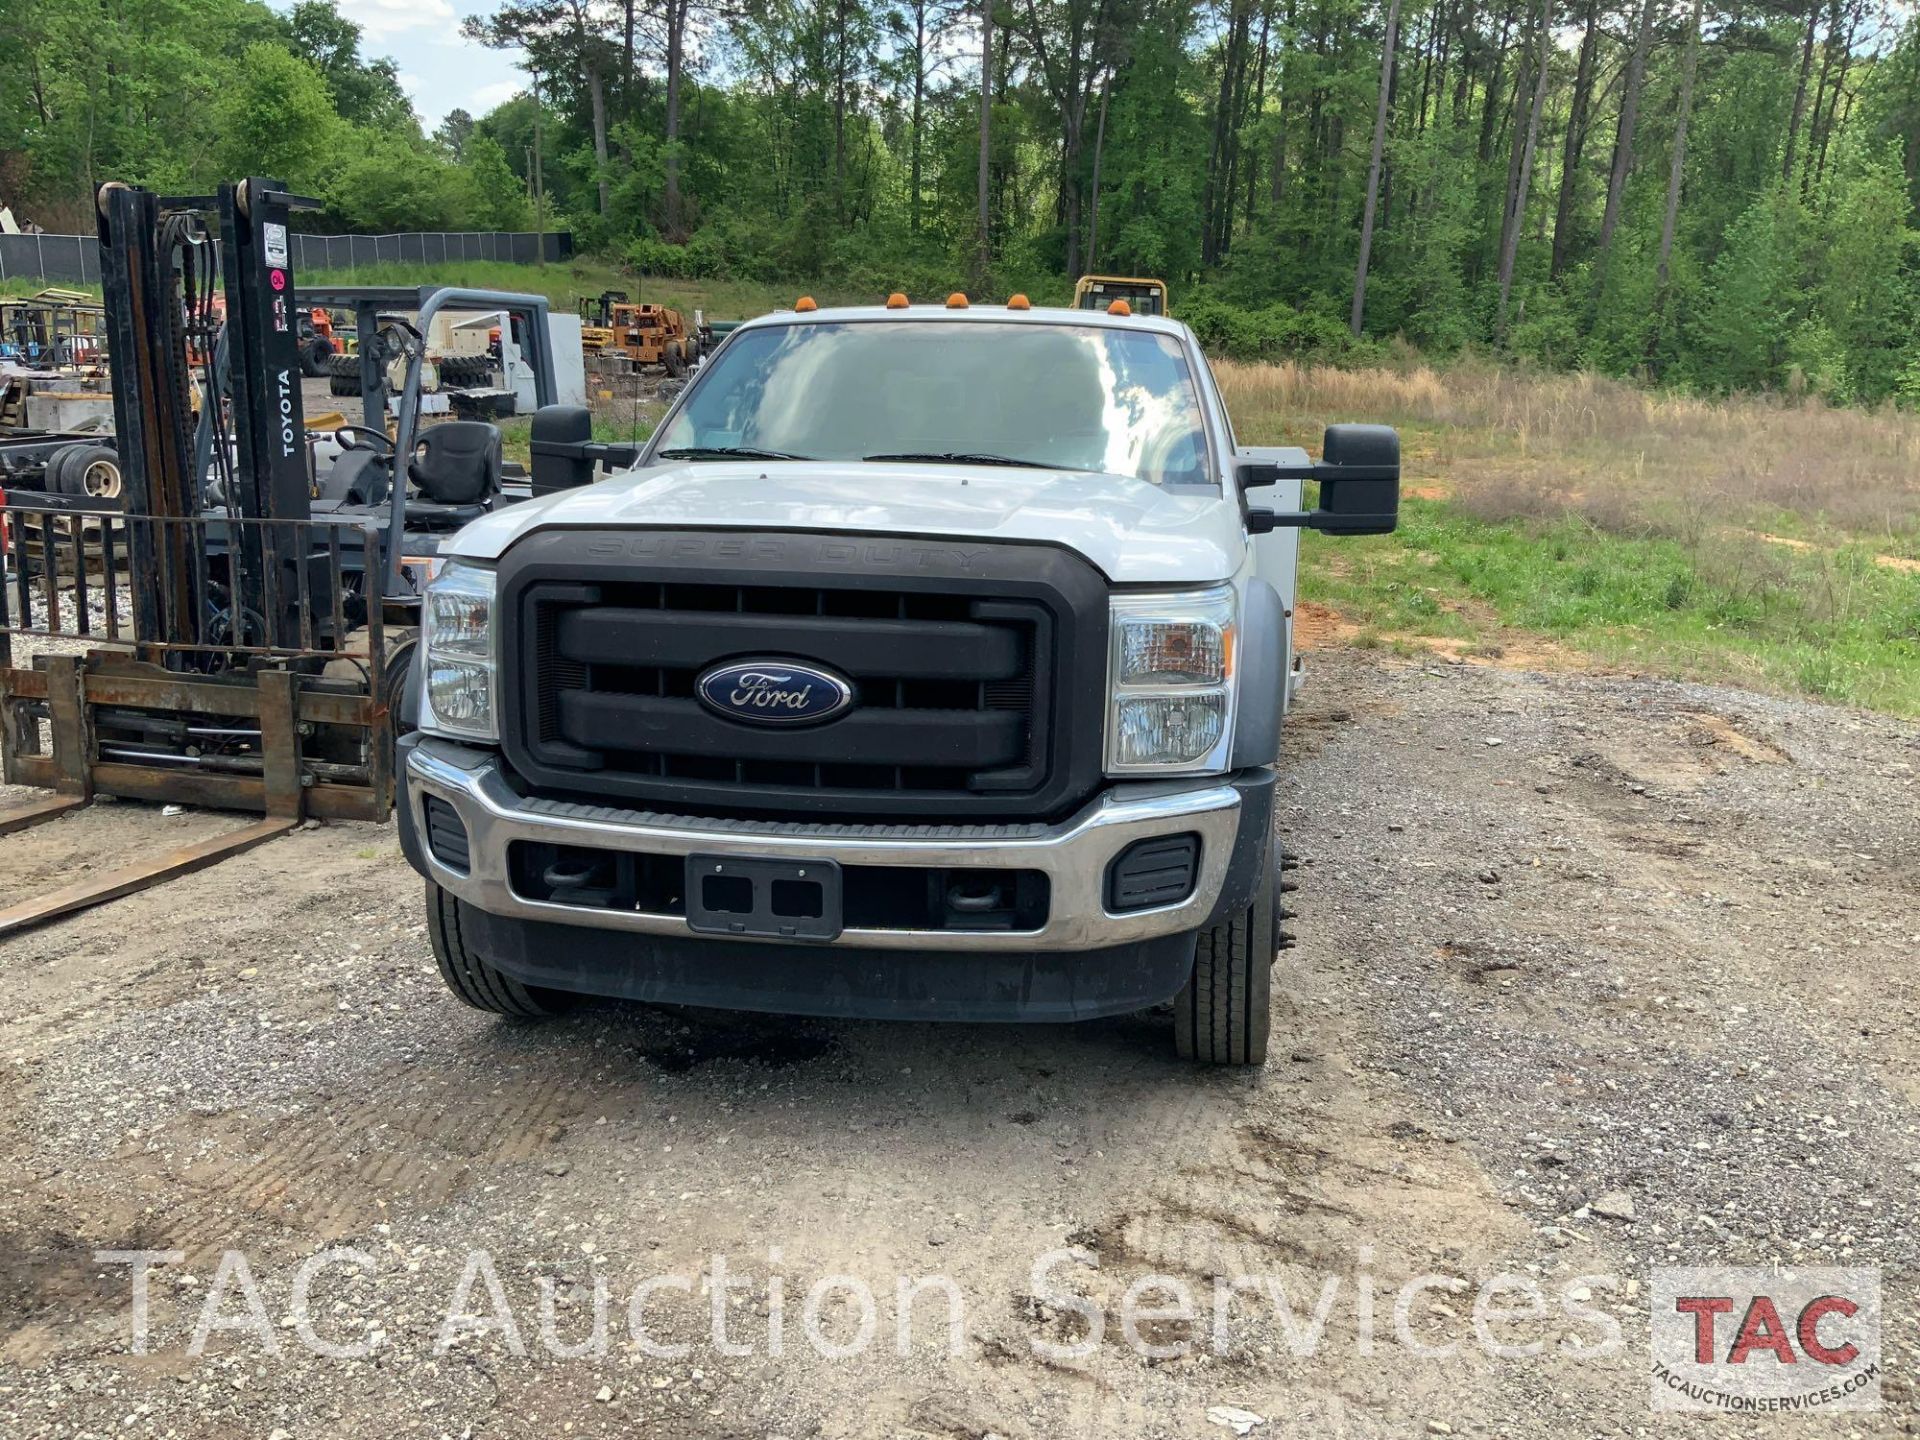 2015 Ford F - 550 Service Truck - Image 2 of 33